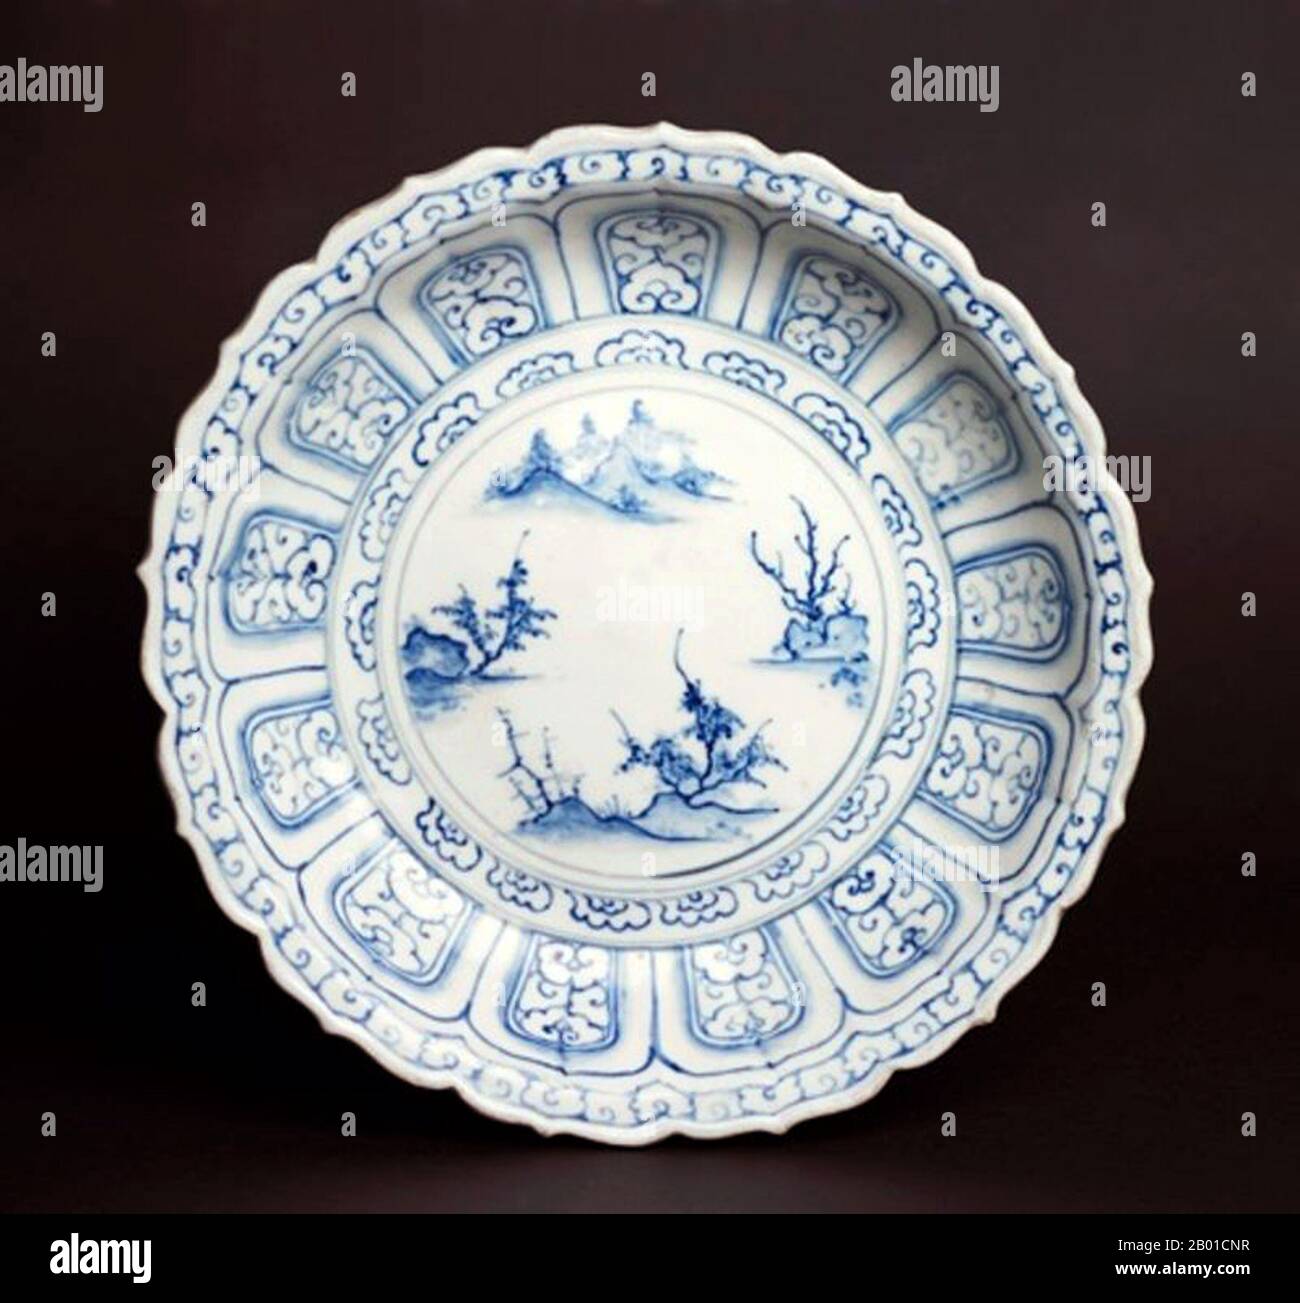 Vietnam: Four Island Plate. Later Lê Dynasty (1533-1788).  Bát Tràng porcelain and pottery is a type of ceramics made in the village of Bát Tràng, in the suburban outskirts of the northern Vietnamese city of Hanoi. The village is located in an area rich in clay suitable for making fine ceramics.  Bát Tràng ceramics are considered some of the best known porcelain products in Vietnam besides those of Chu Đậu, Đồng Nai, Phu Lang, and Ninh Thuận. Stock Photo